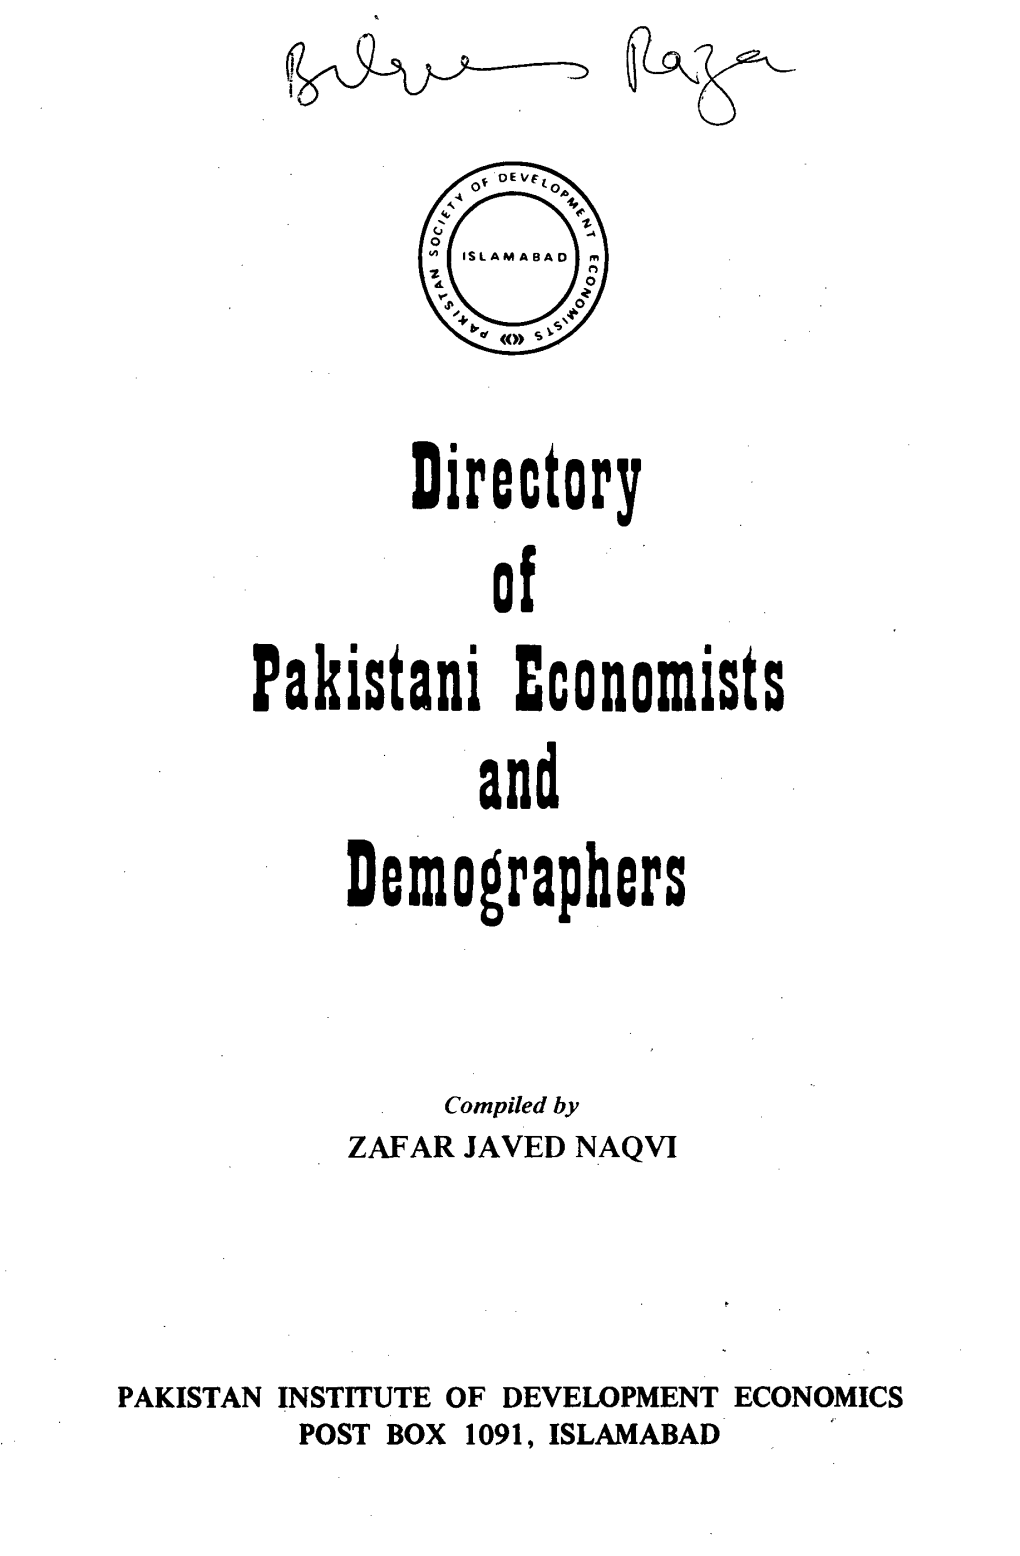 Directory of Pakistani Economists .And Demographers by the Society Should Go a Long Way in Promoting Contacts Between Members of the Economic Profession in Pakistan